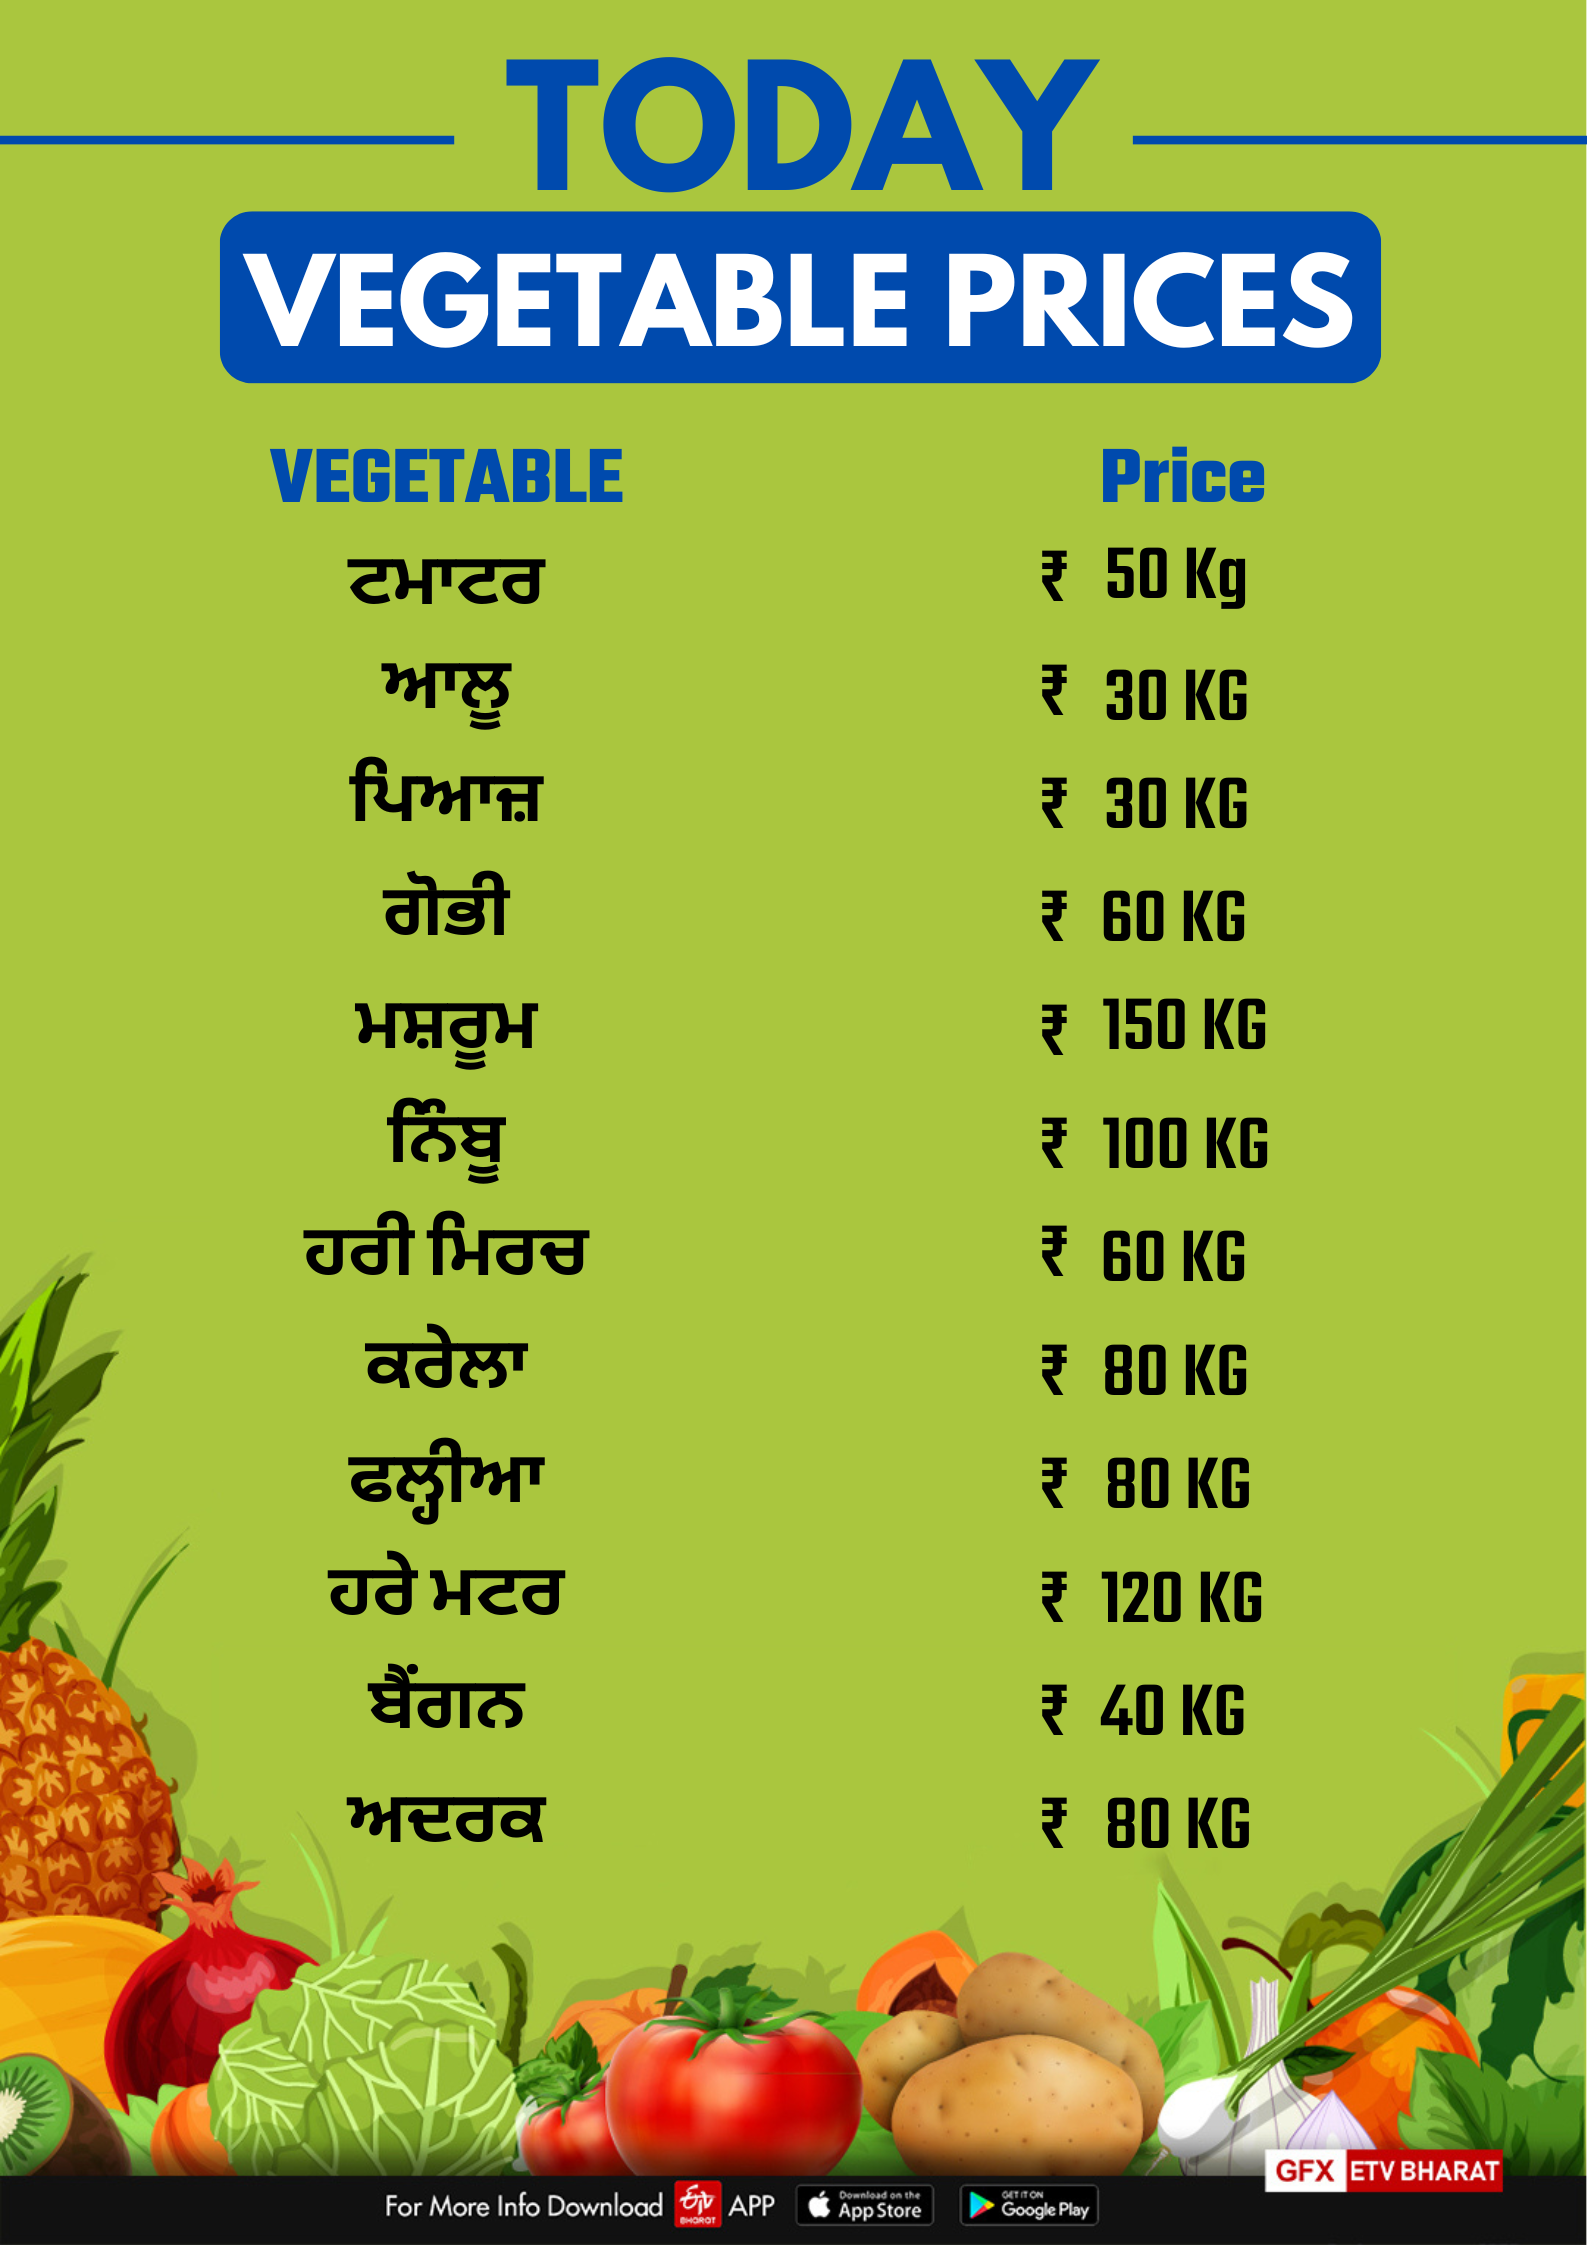 Vegetable rates in Punjab on October 12